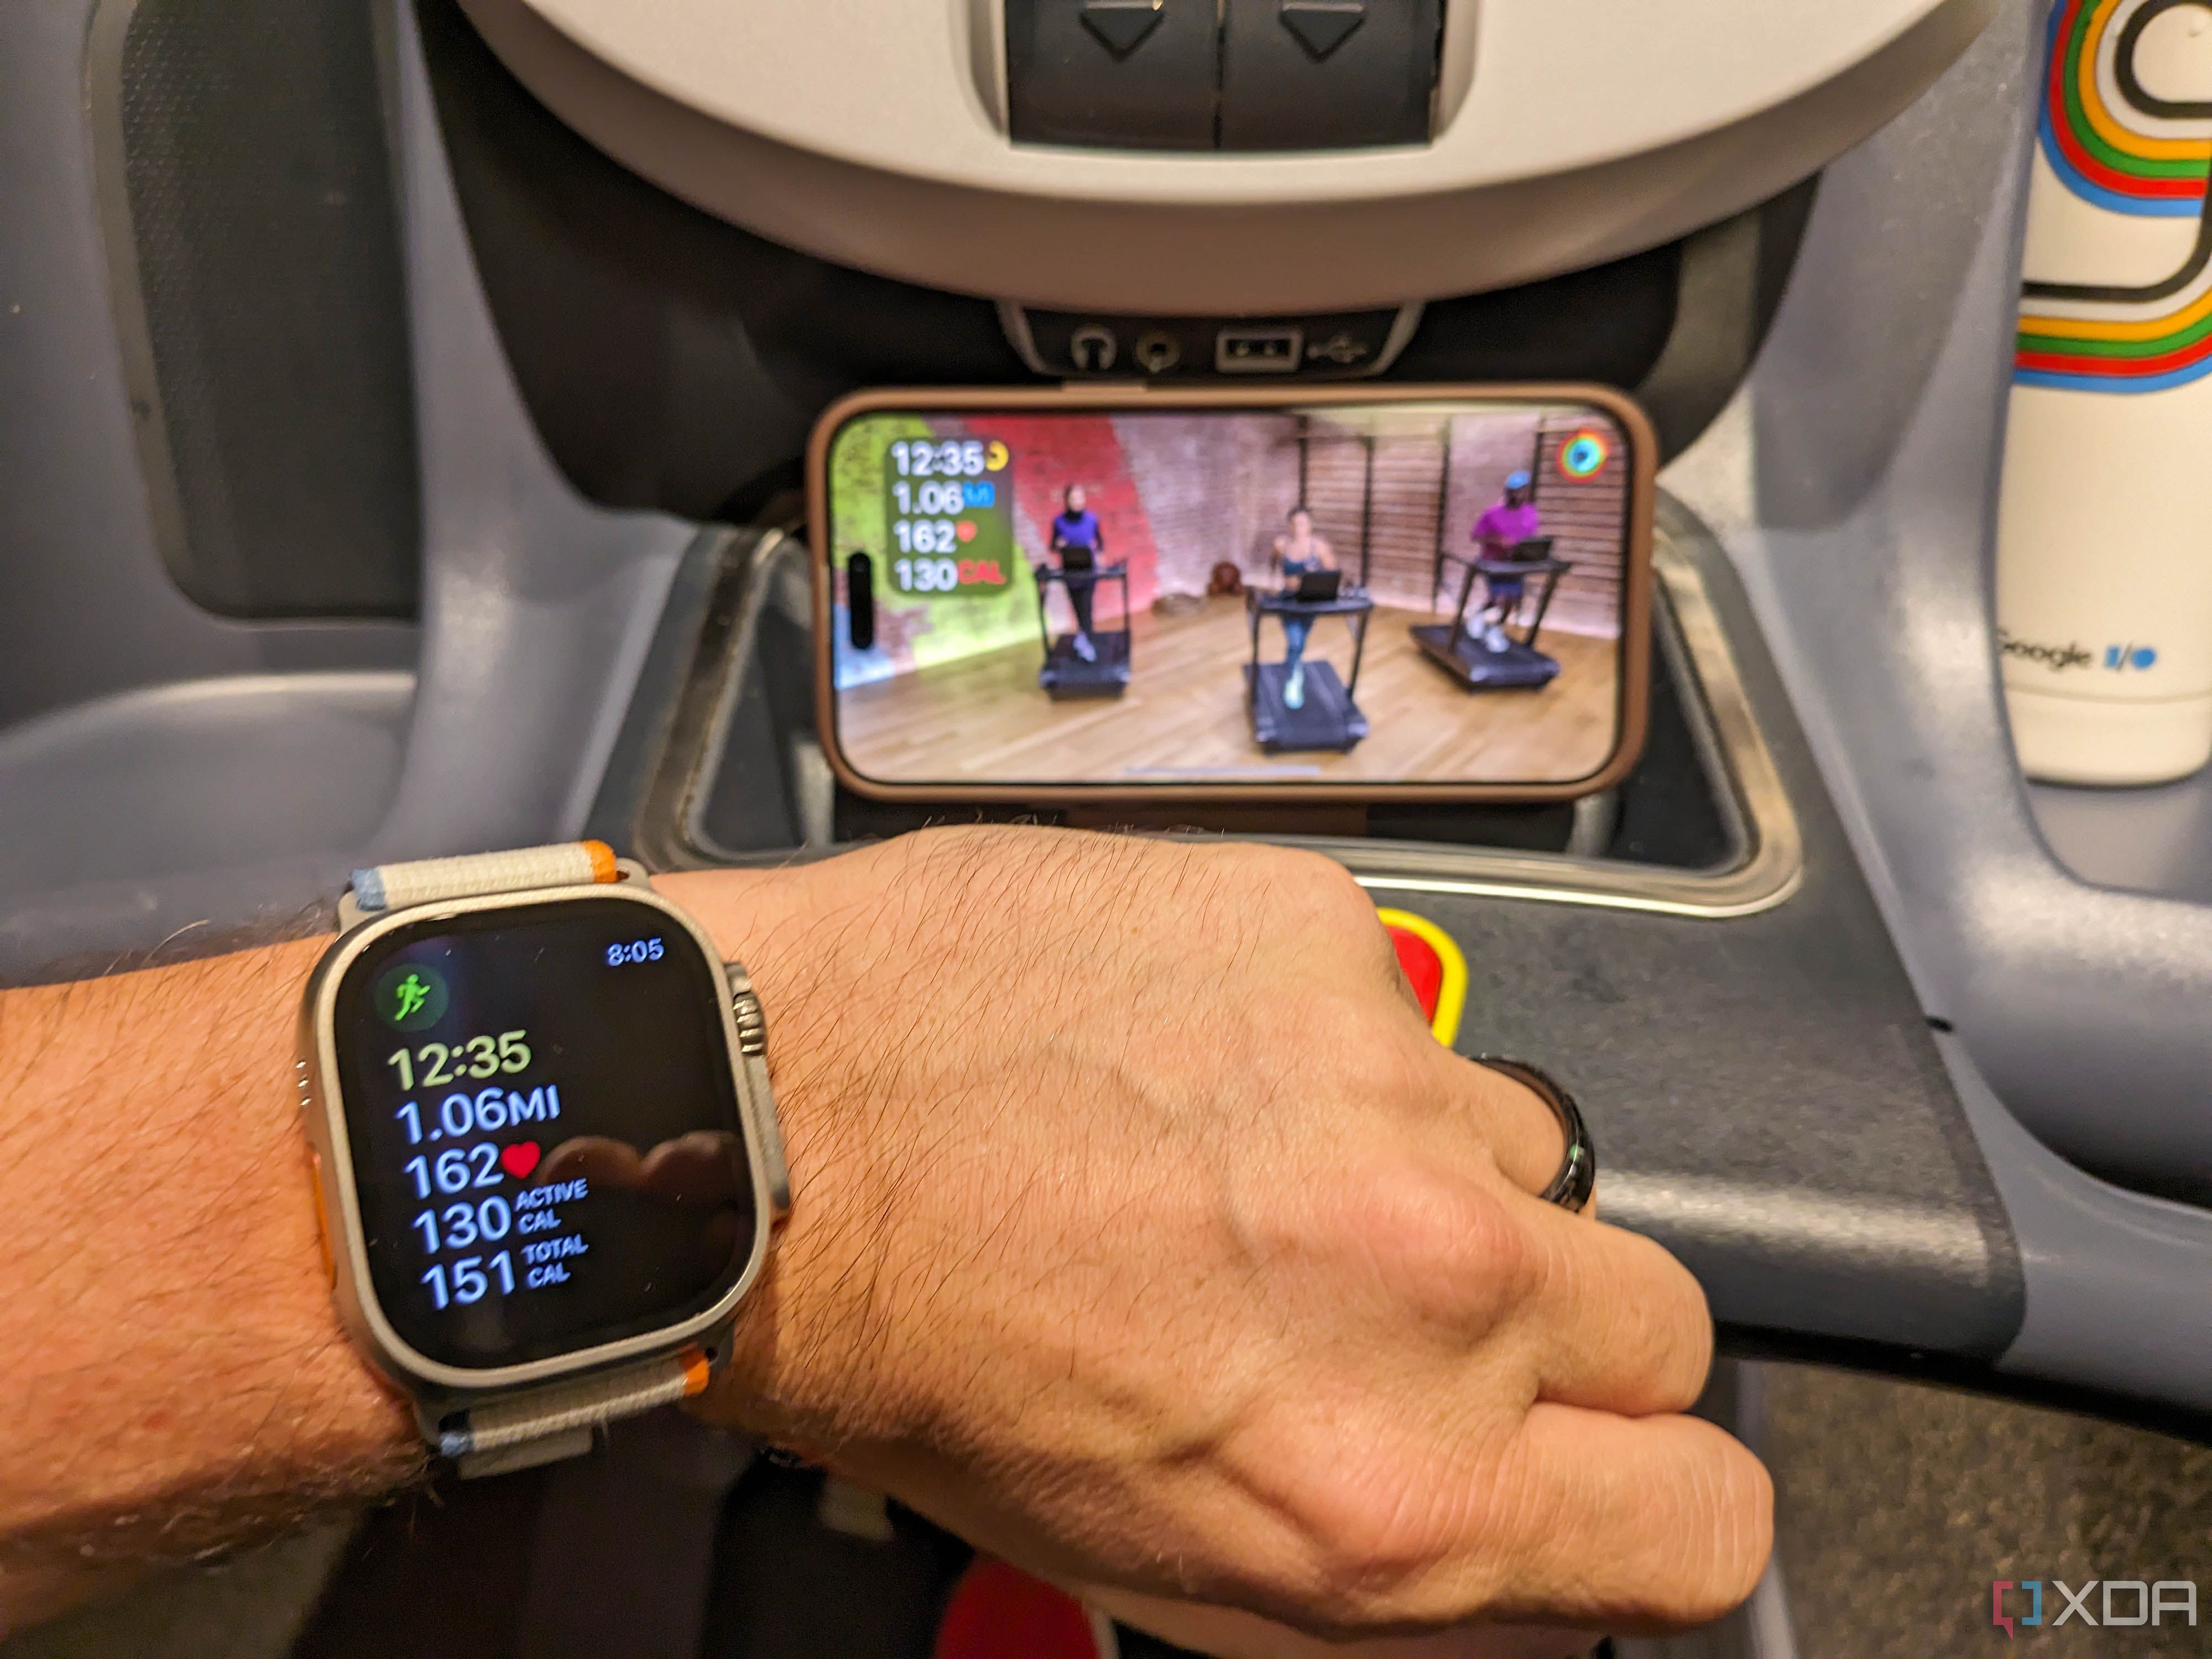 Apple Watch with treadmill workout on display in background